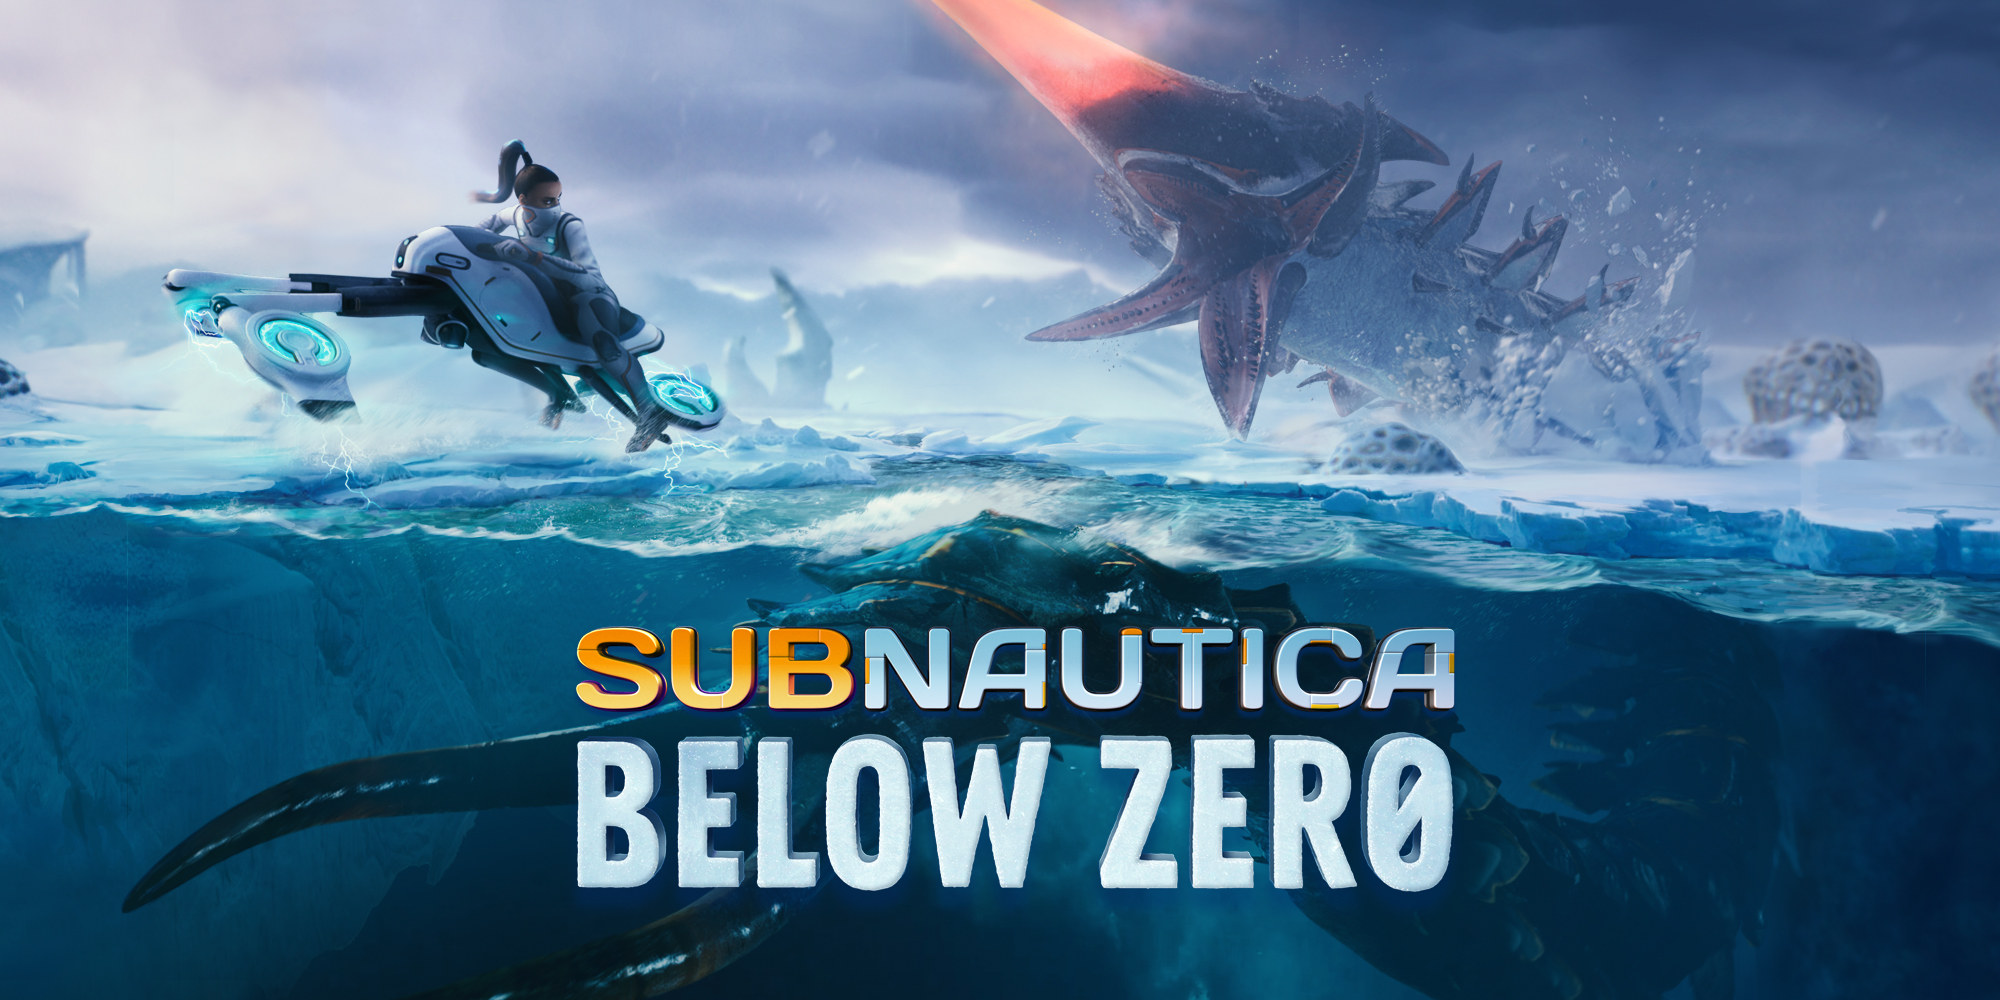 when will subnautica below zero be finished